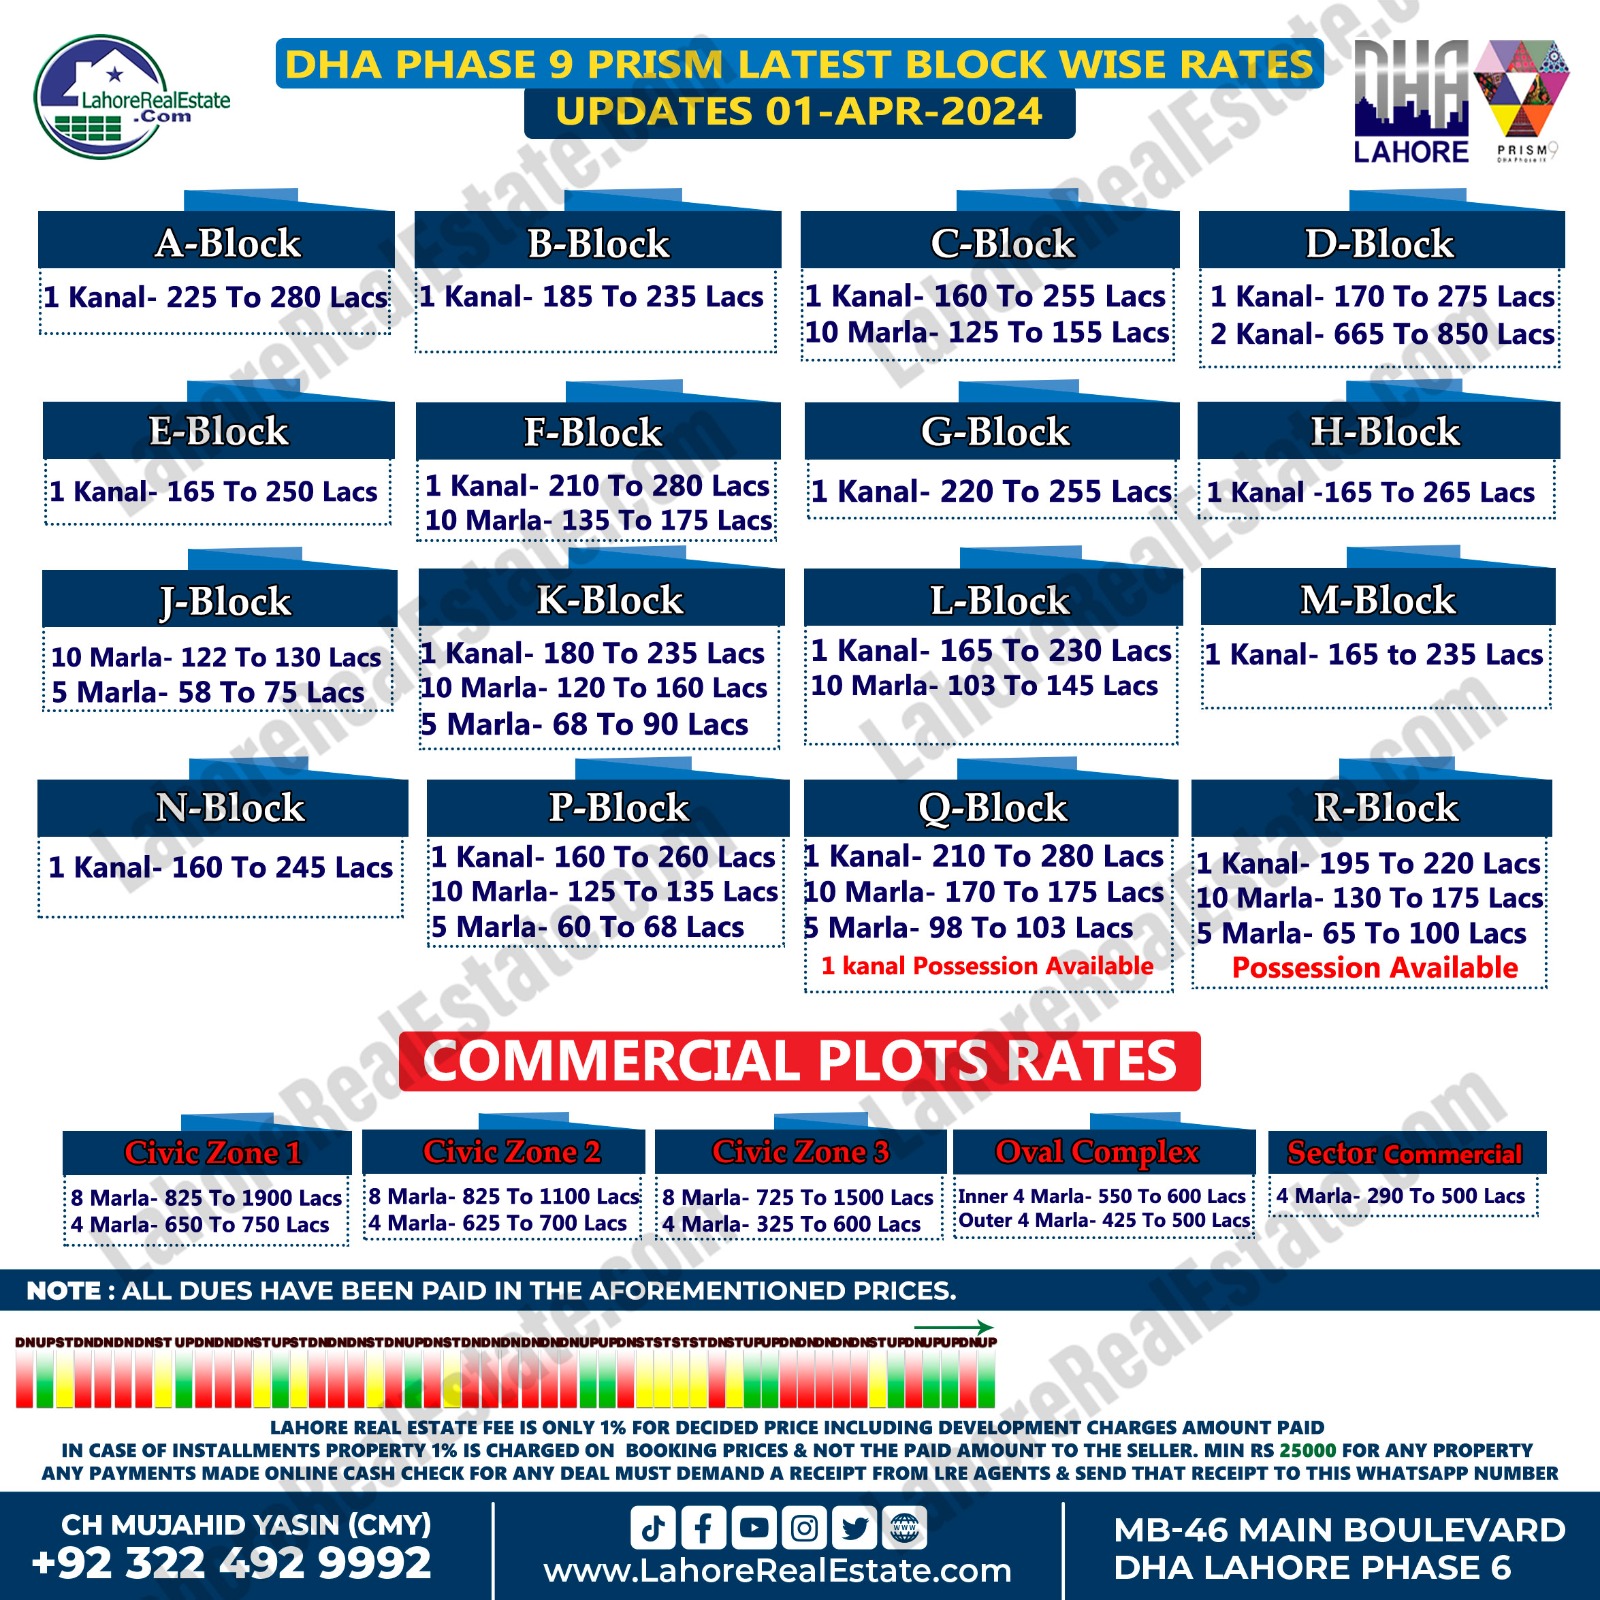 DHA Lahore Phase 9 Prism Plot Prices Update April 01, 2024